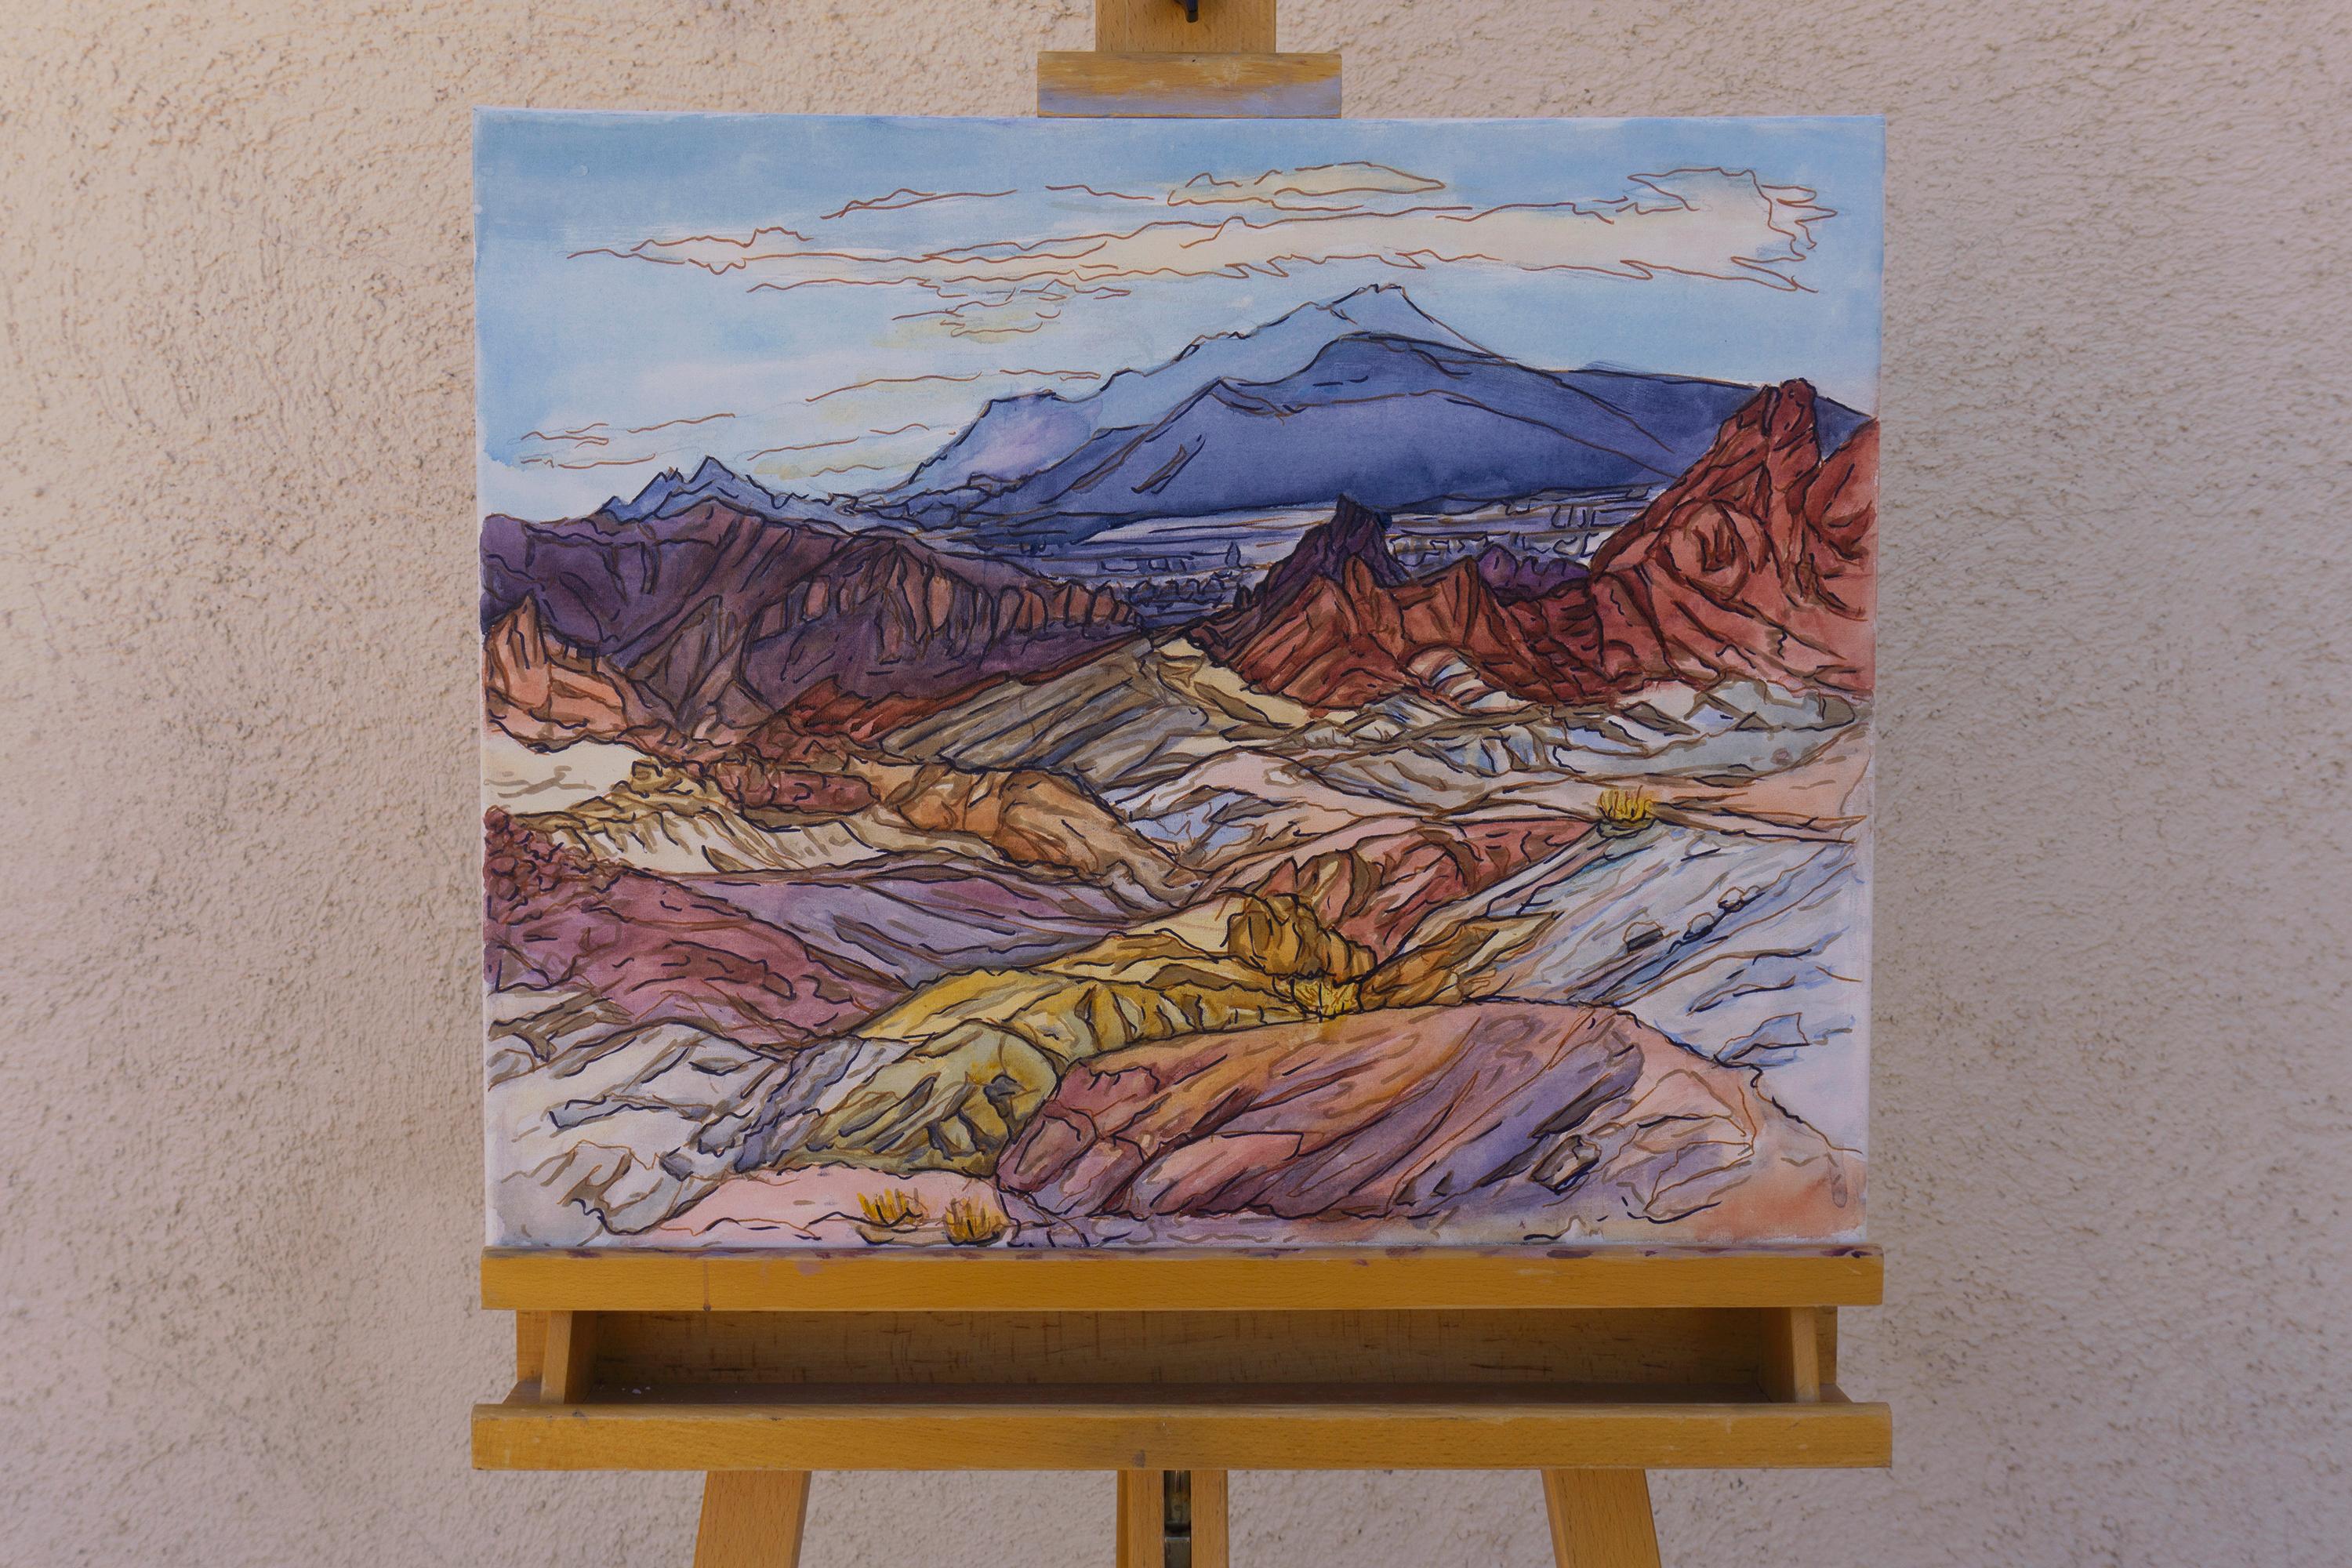 <p>Artist Comments<br>Colorful ridges and mountains bring layers of contrast to the scene, while light and shadows accentuate the ruggedness of the terrain. Expressive strokes capture the dynamic textures and energy of the desert. Painted en plein